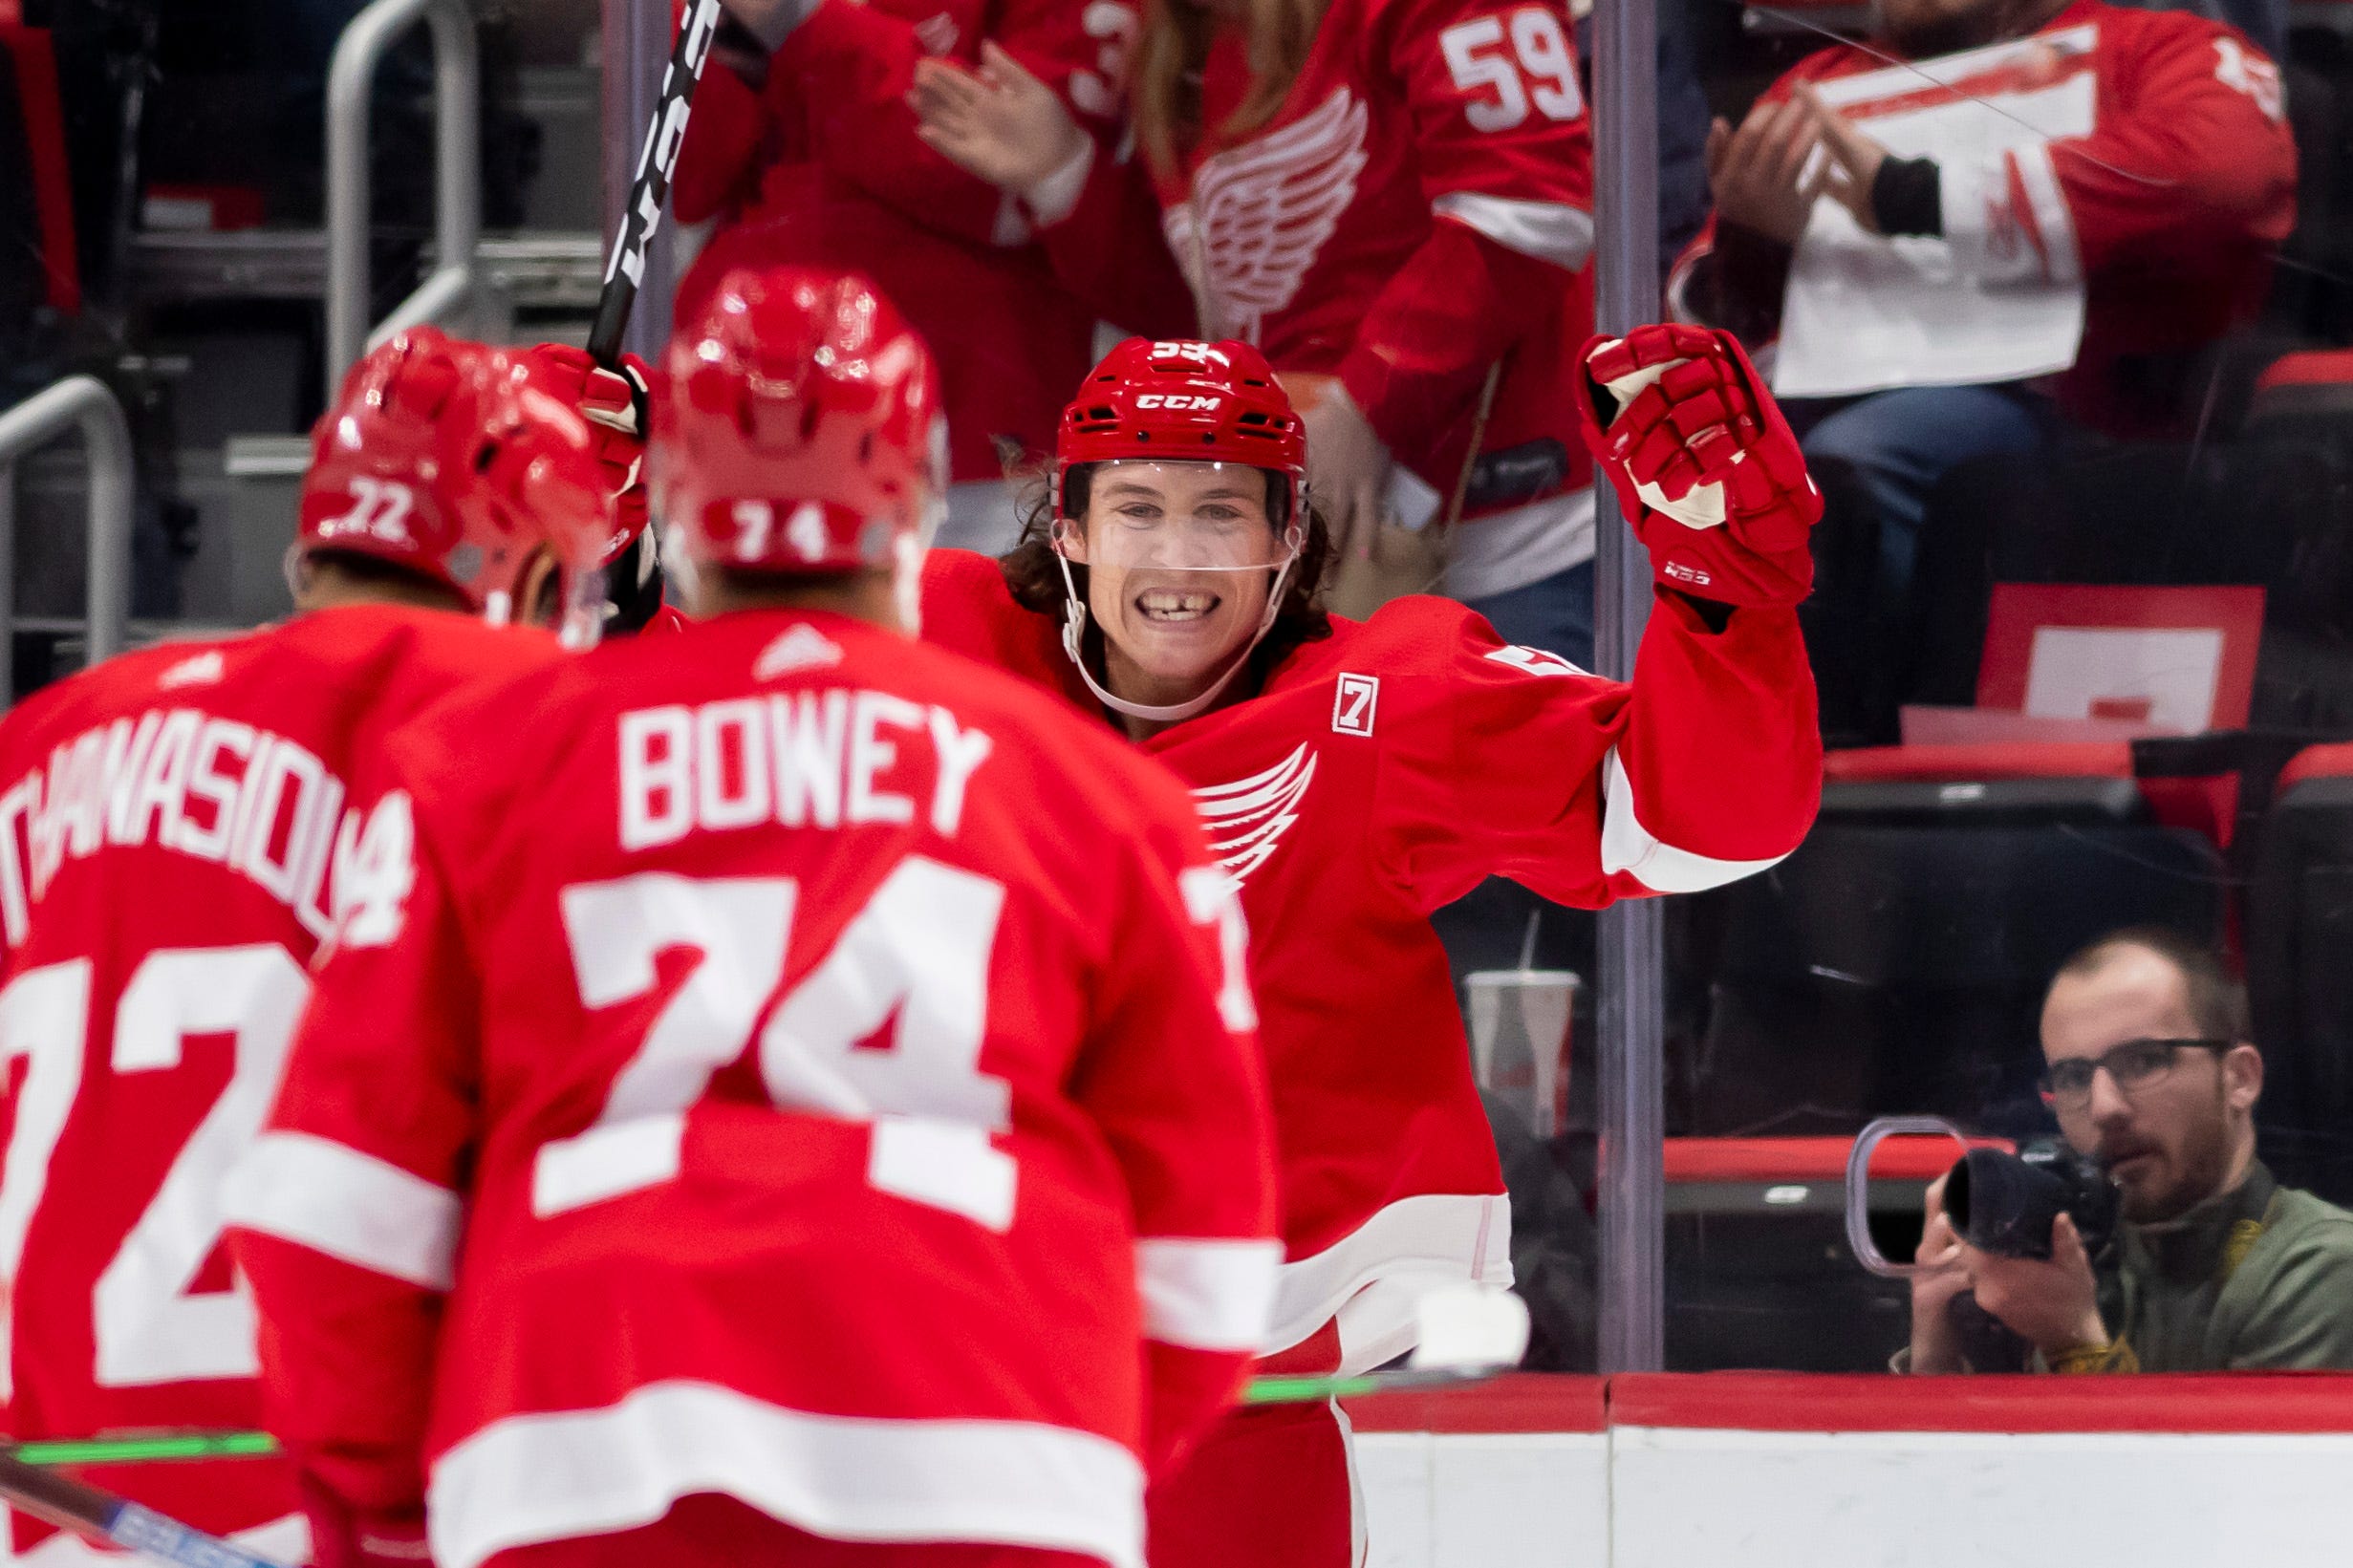 Detroit left wing Tyler Bertuzzi celebrates with his teammates after scoring in the second period.